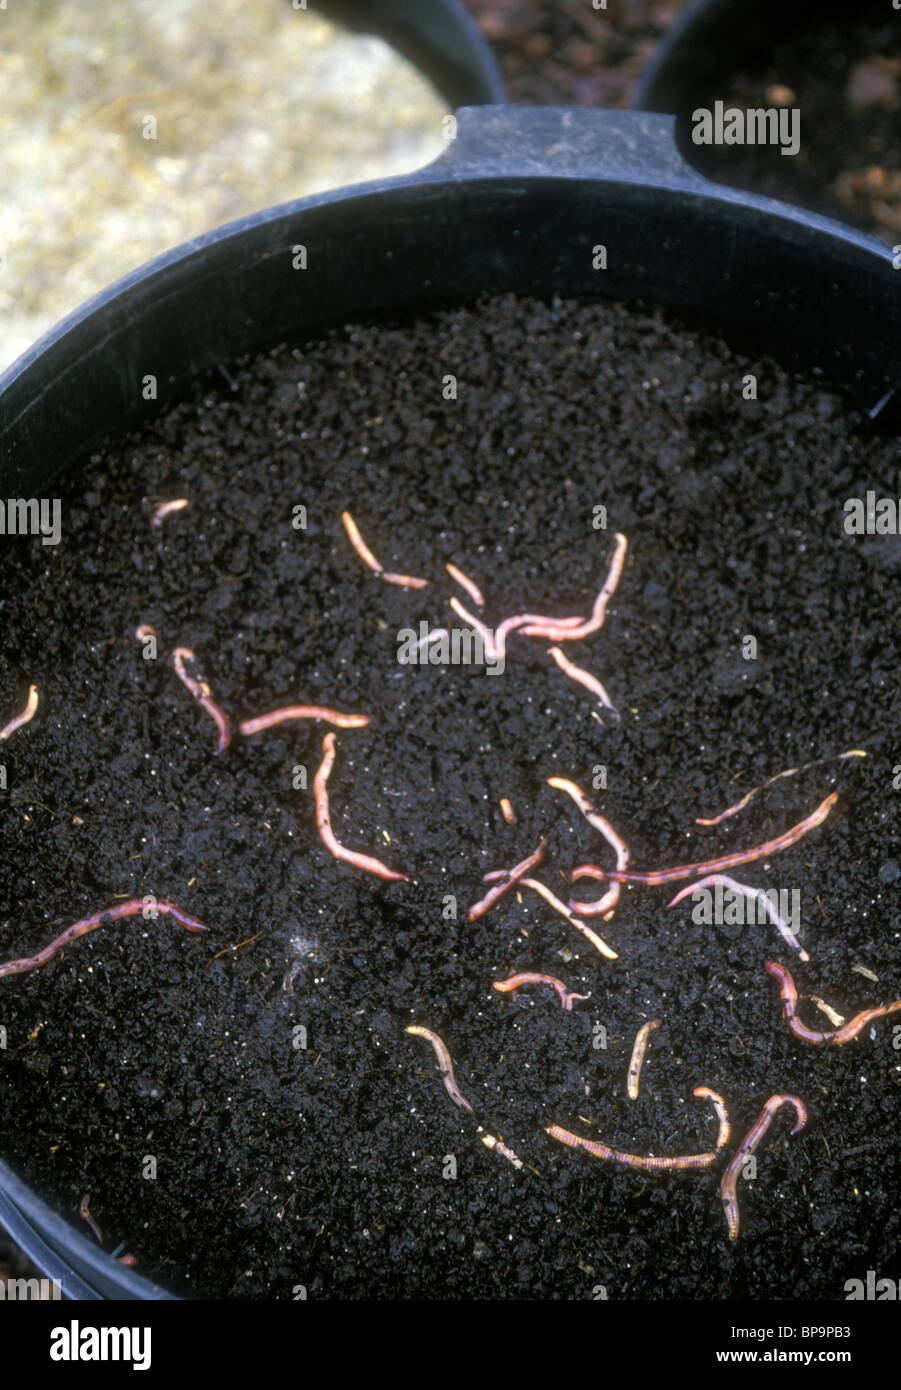 Worm compost bin vermicompost showing lid off & red worms in top layer of decomposed materials; see also 1st image closed bin Stock Photo